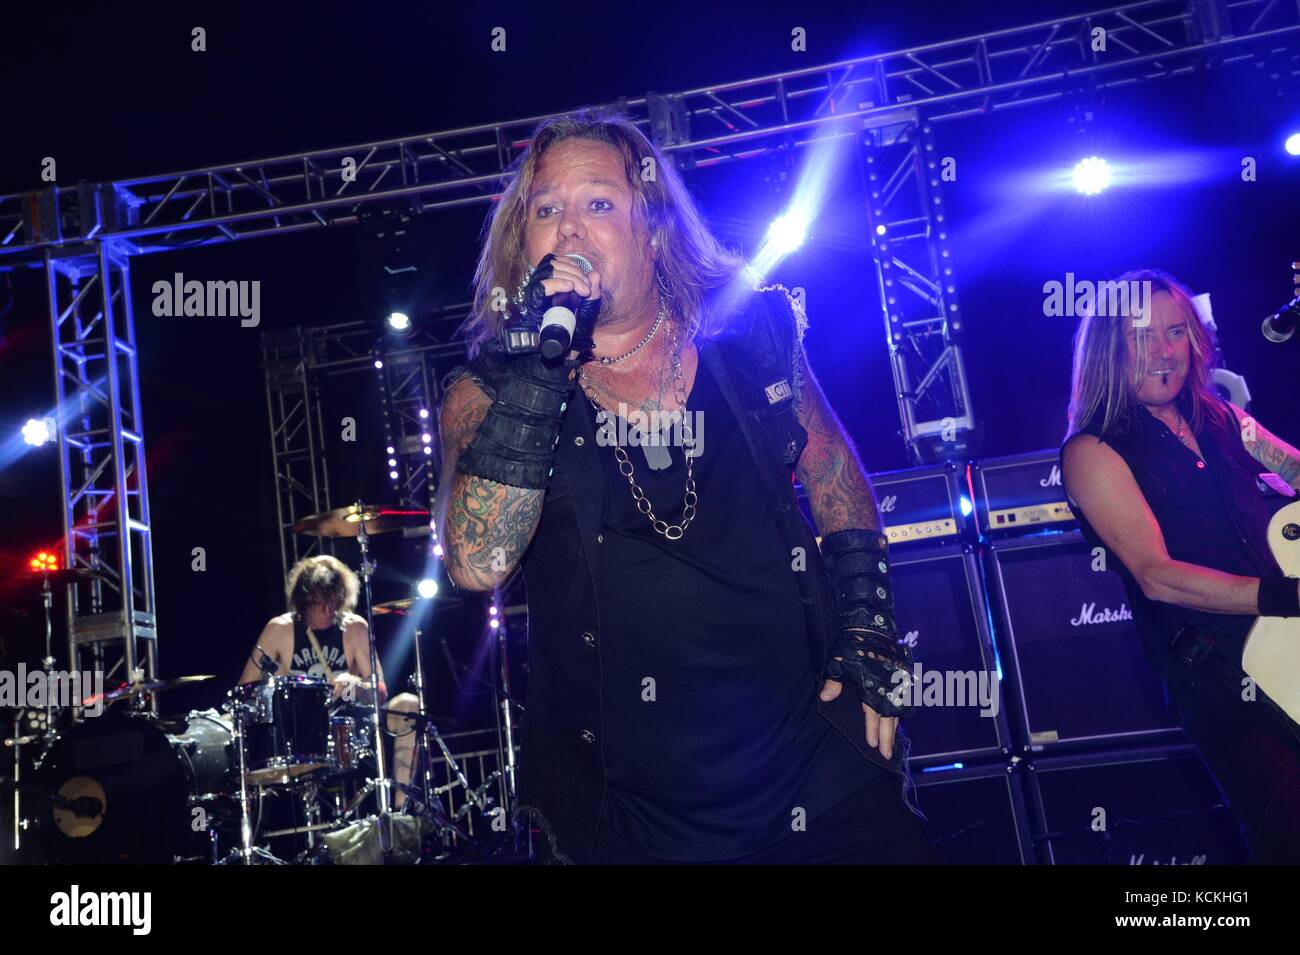 Rock band Motley Crue singer Vince Neil performs during the Los Angeles Fleet Week at the Battleship USS Iowa Museum September 2, 2017 in Los Angeles, California.    (photo by MCS1 Ronald Gutridge  via Planetpix) Stock Photo